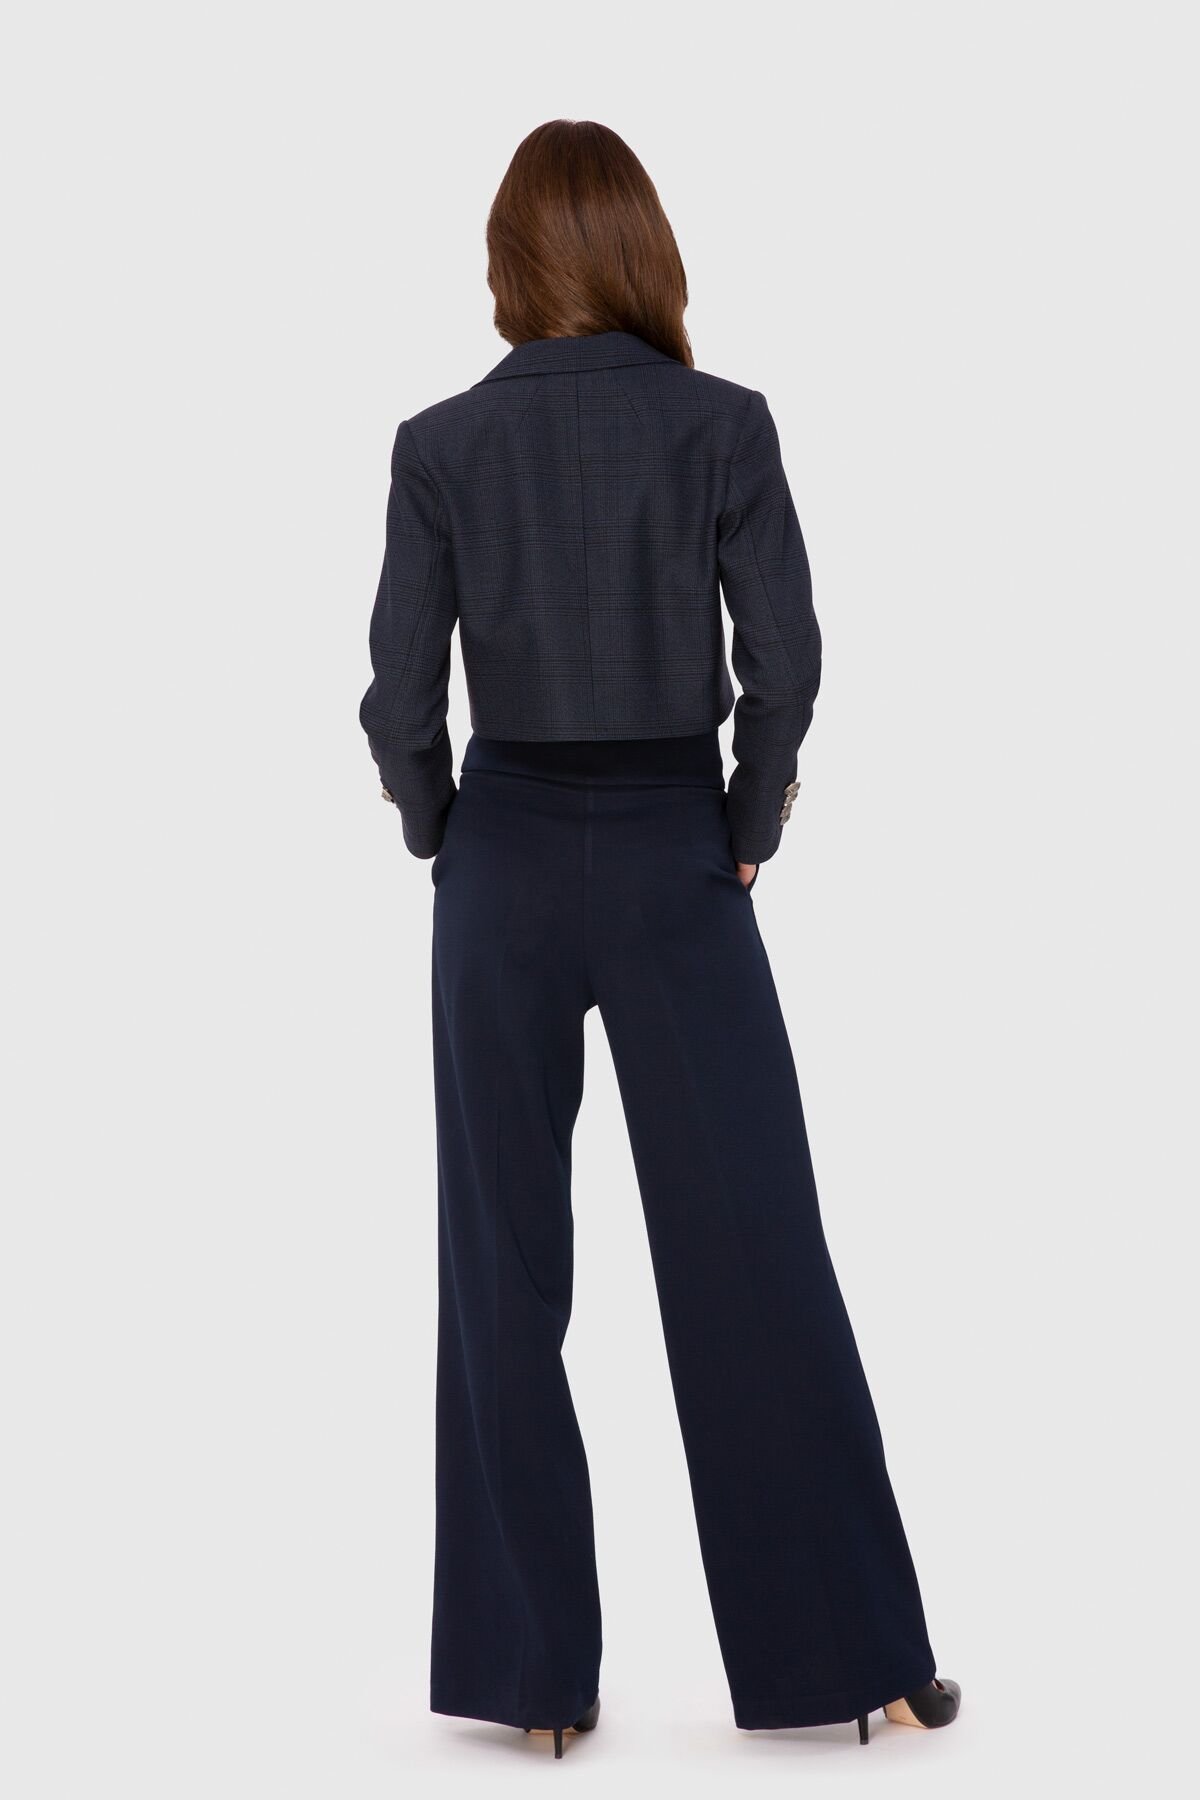 Navy Blue Suit With Waist Detail Short Jacket